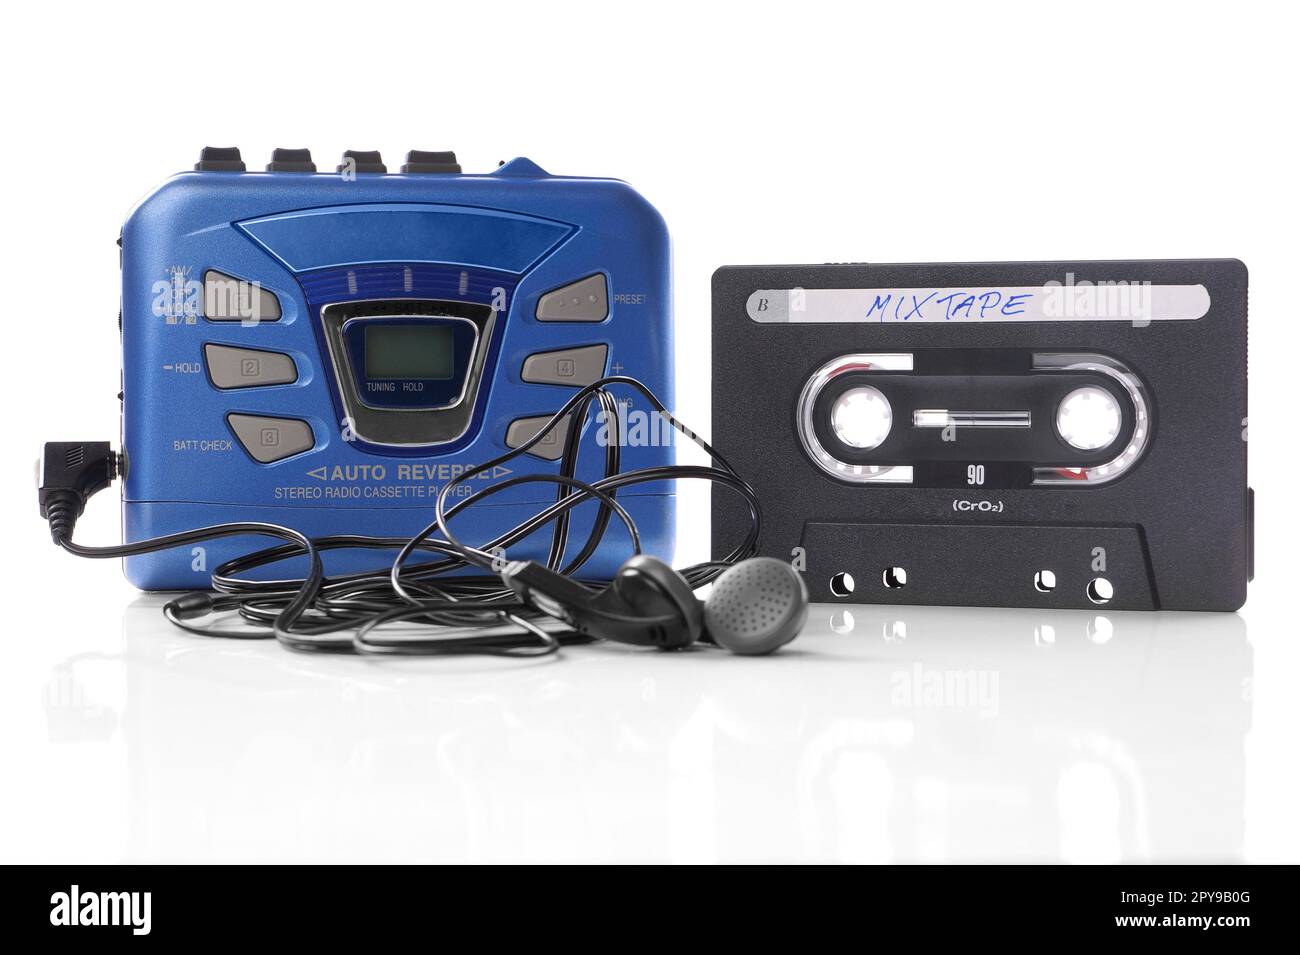 old-fashioned music cassette and walkman player with earphones Stock Photo